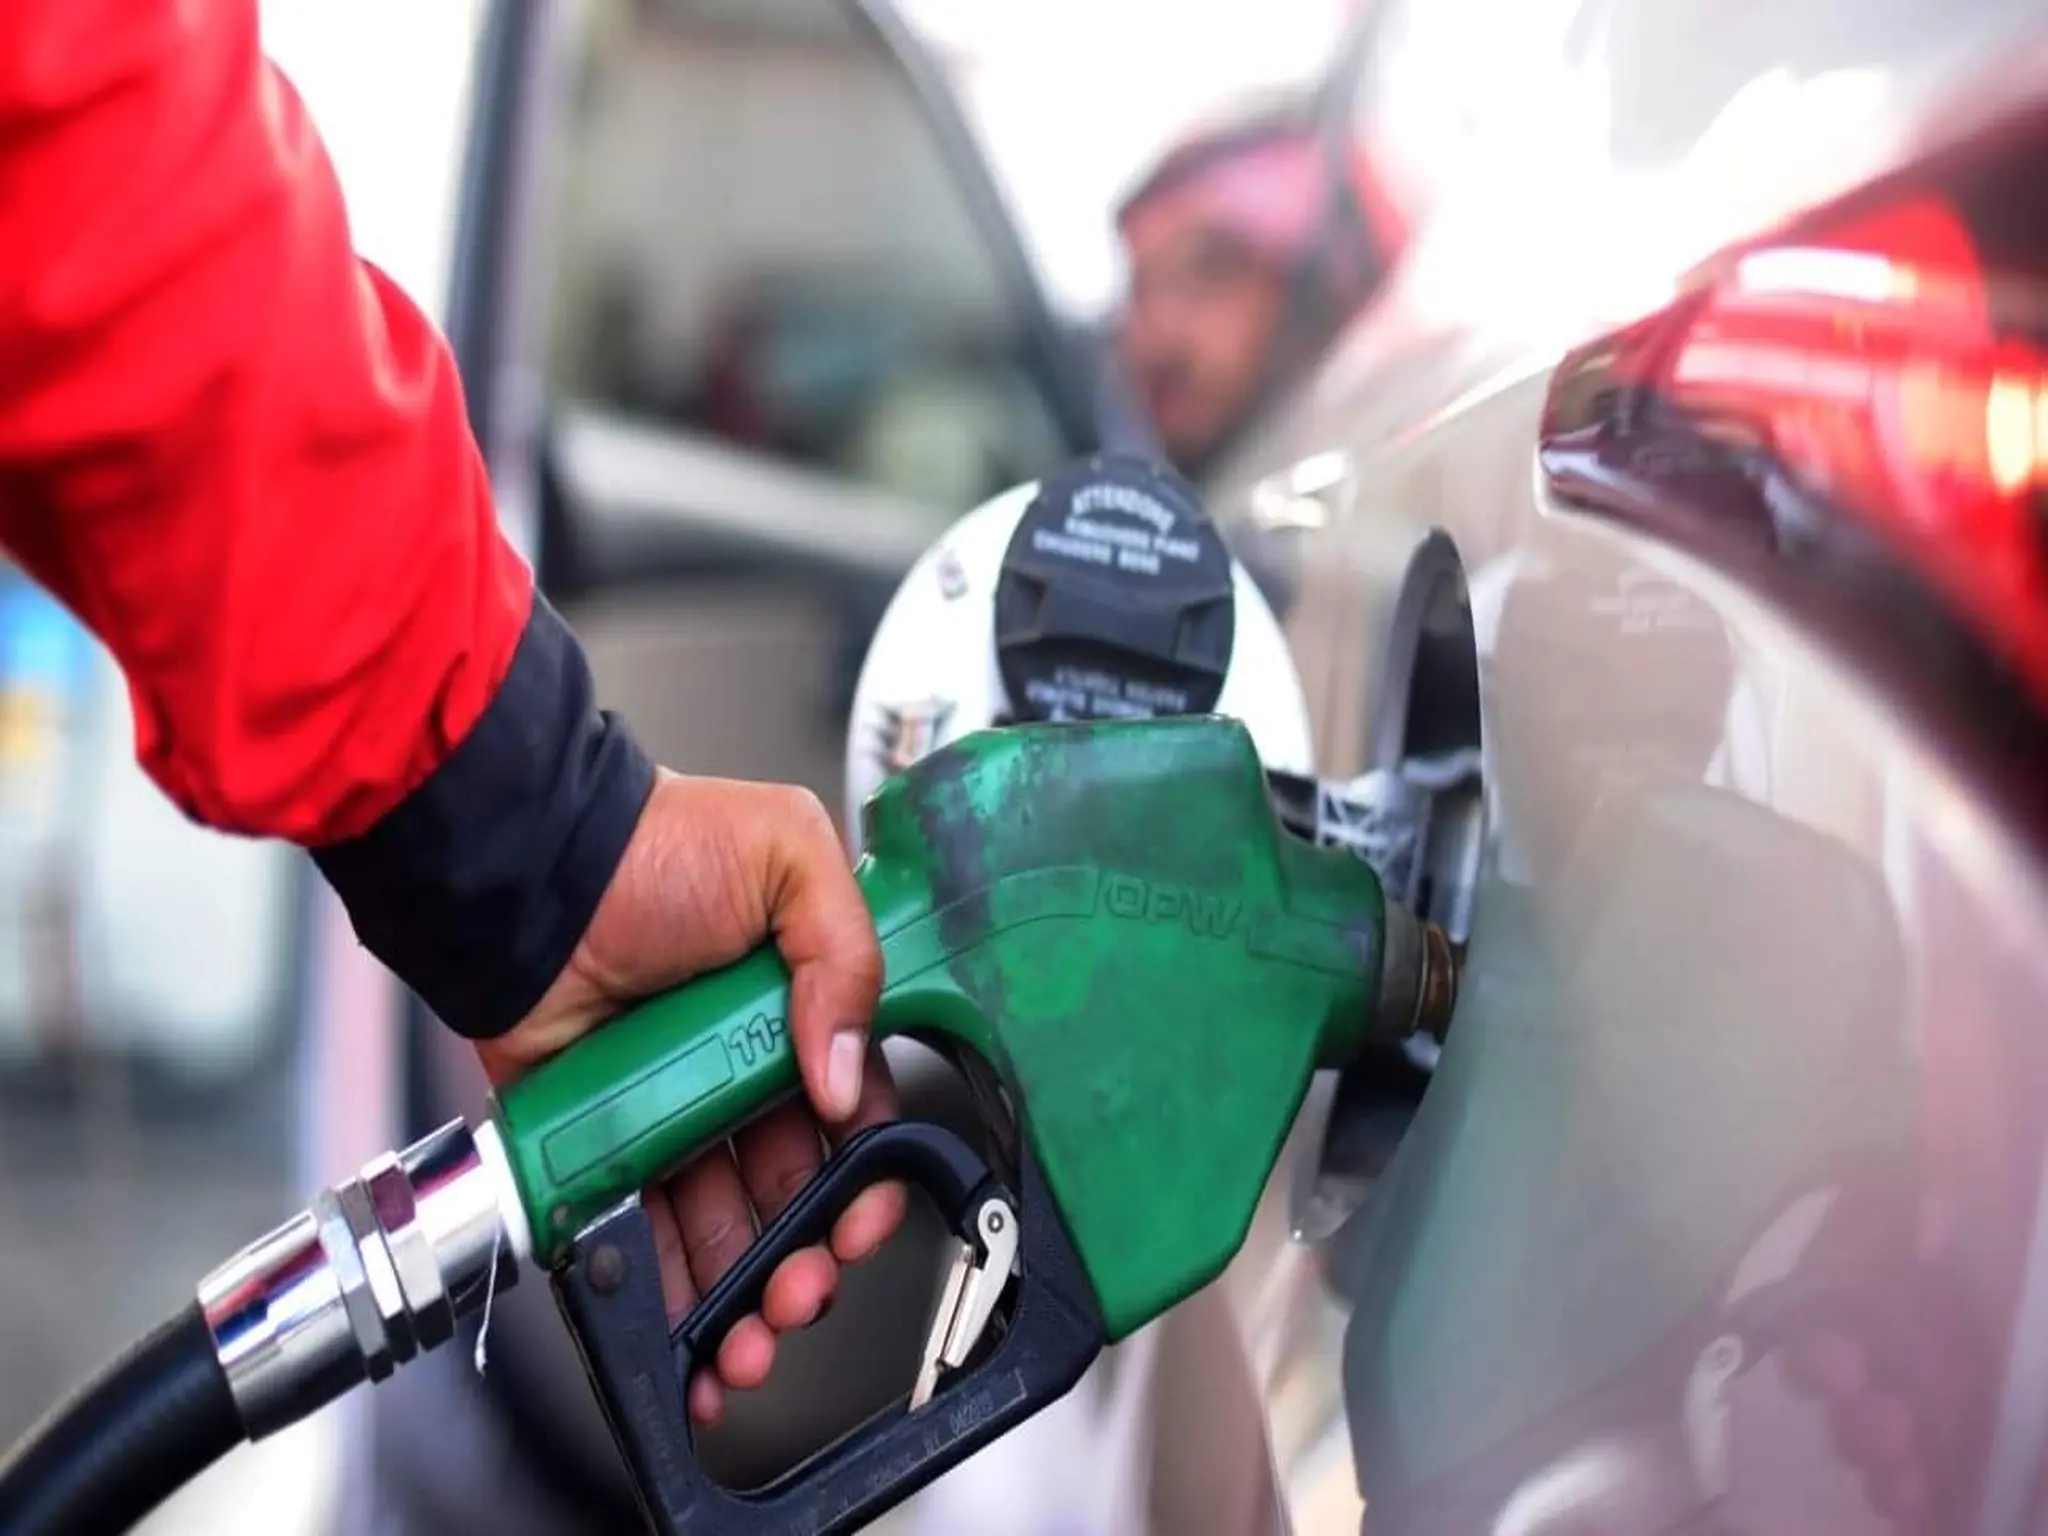 UAE: Announcing an increase in gasoline and diesel prices starting in March